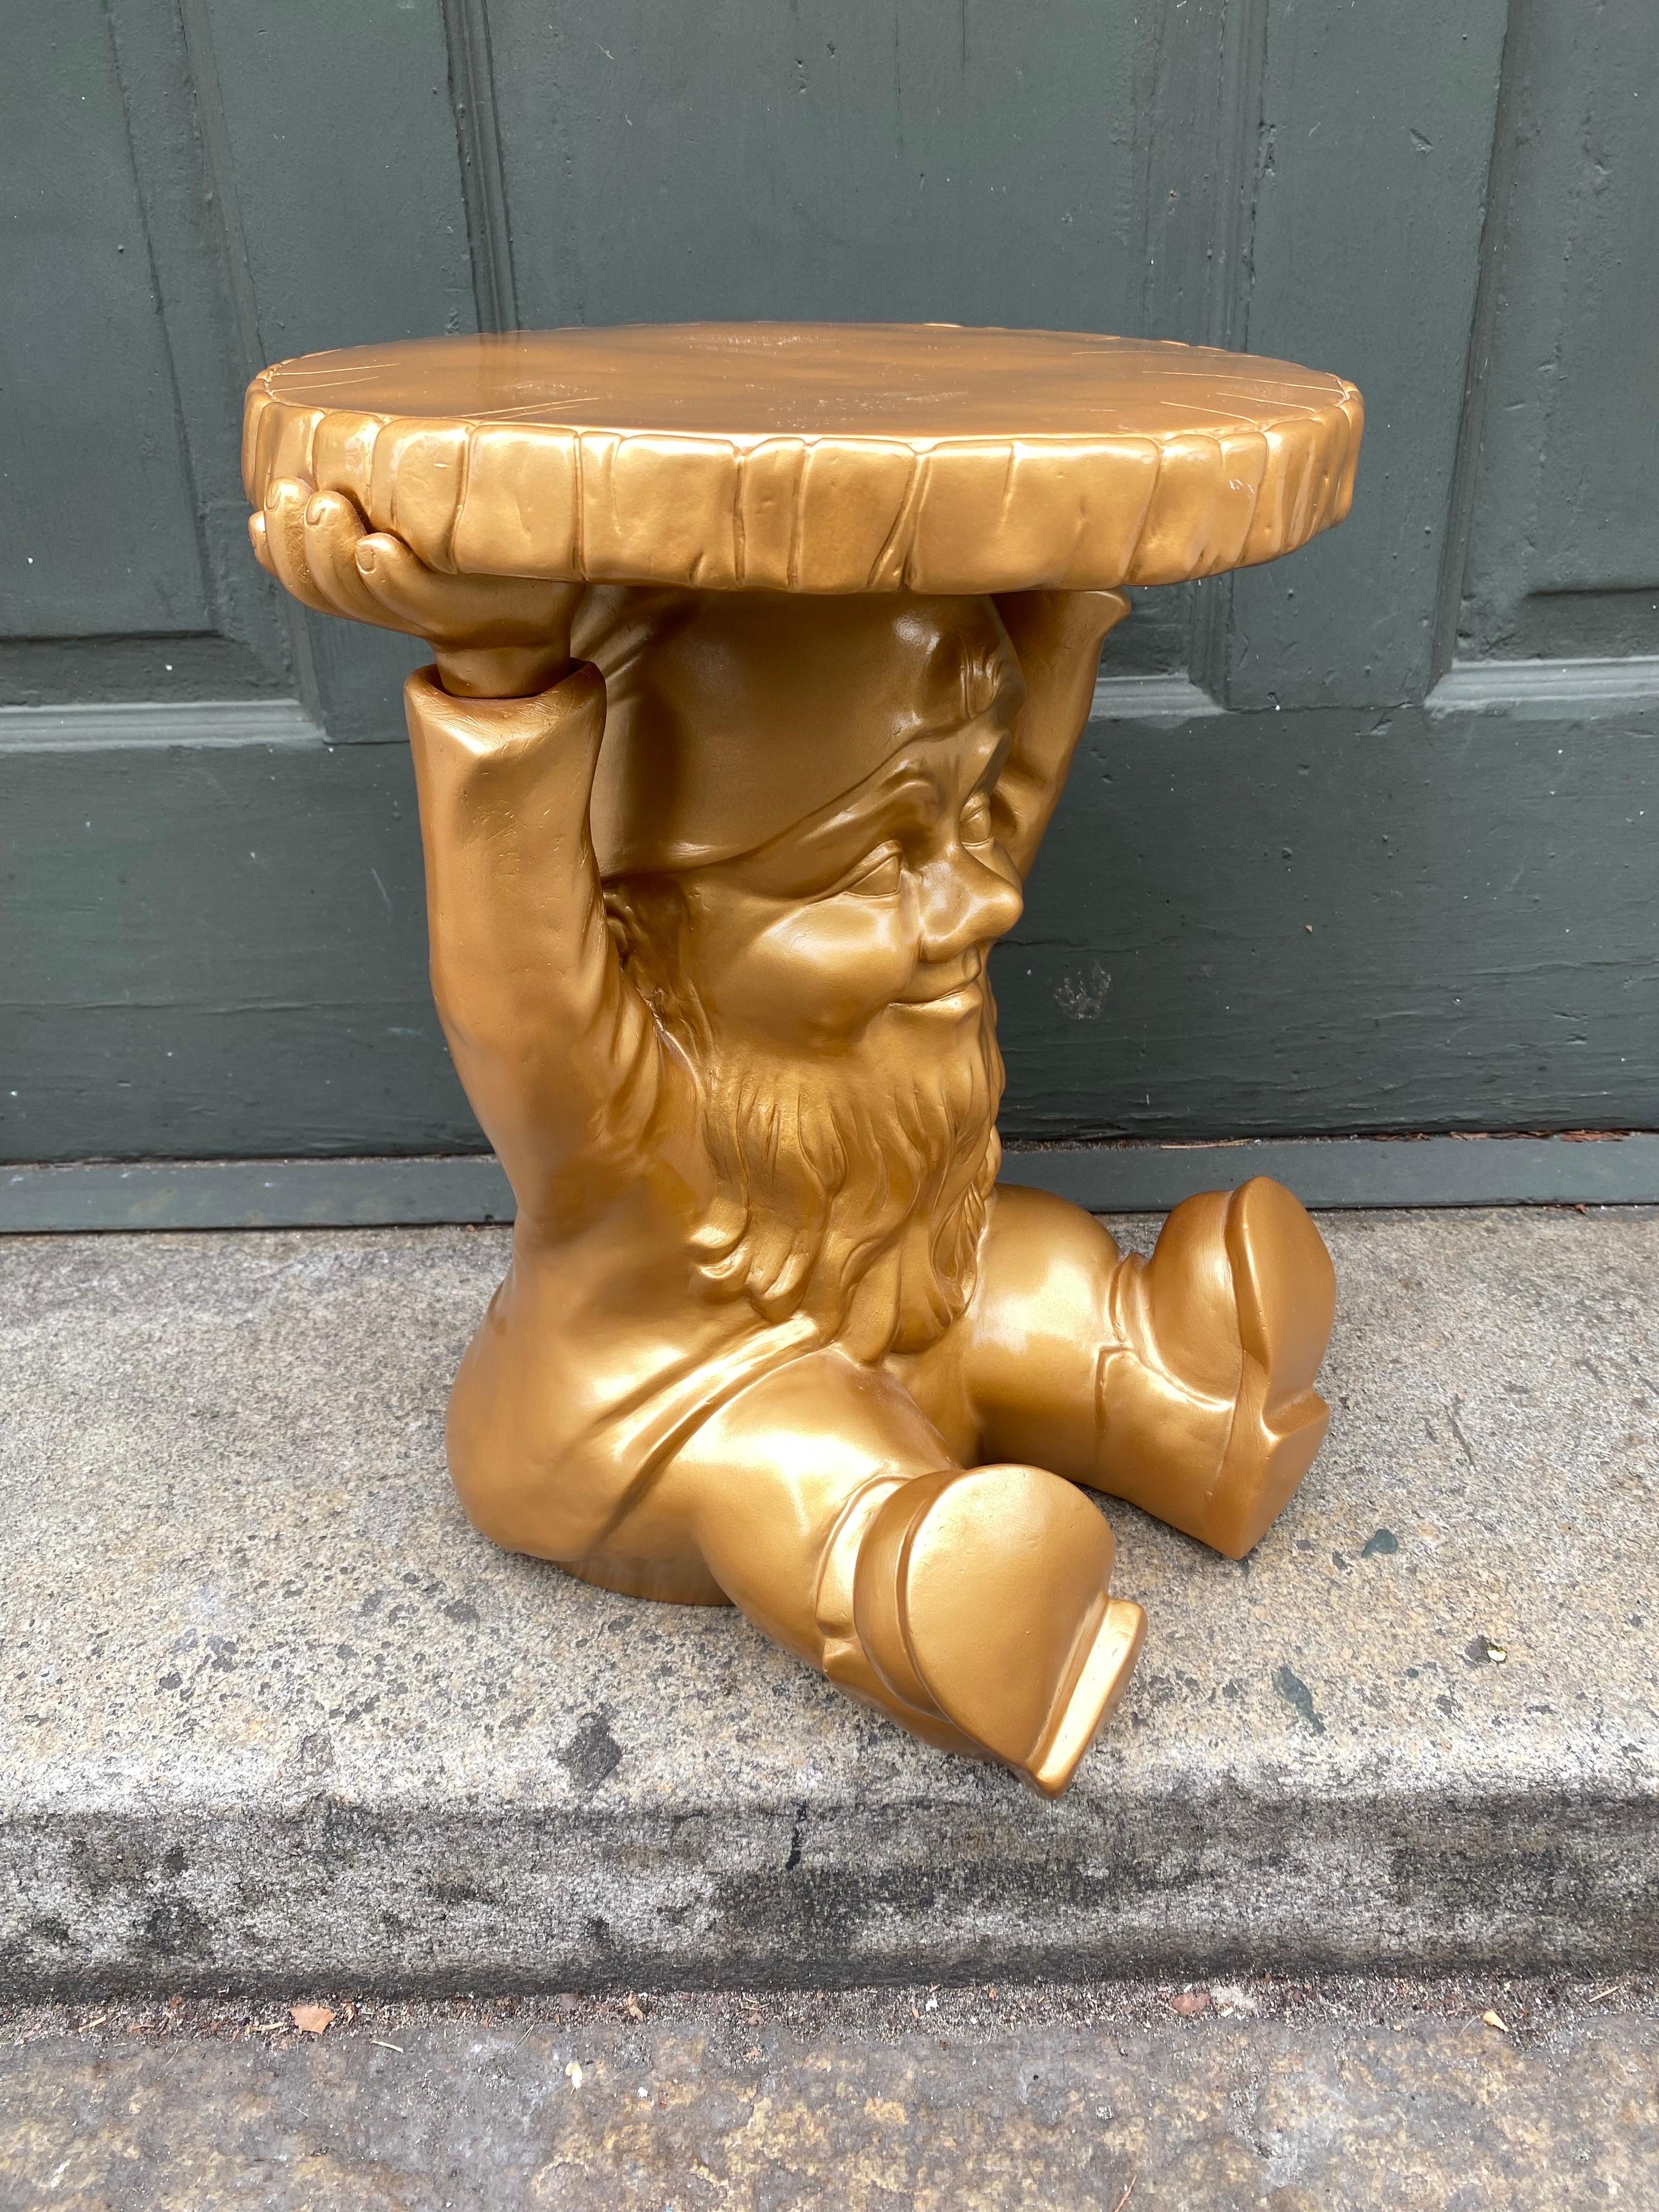 Philippe Starck for Kartell Gold Gnome.  Injection Plastic Construction, indoor/outdoor use.  Clever Fun Little piece that works as a table or stool!  This one is very clean and appears almost new!